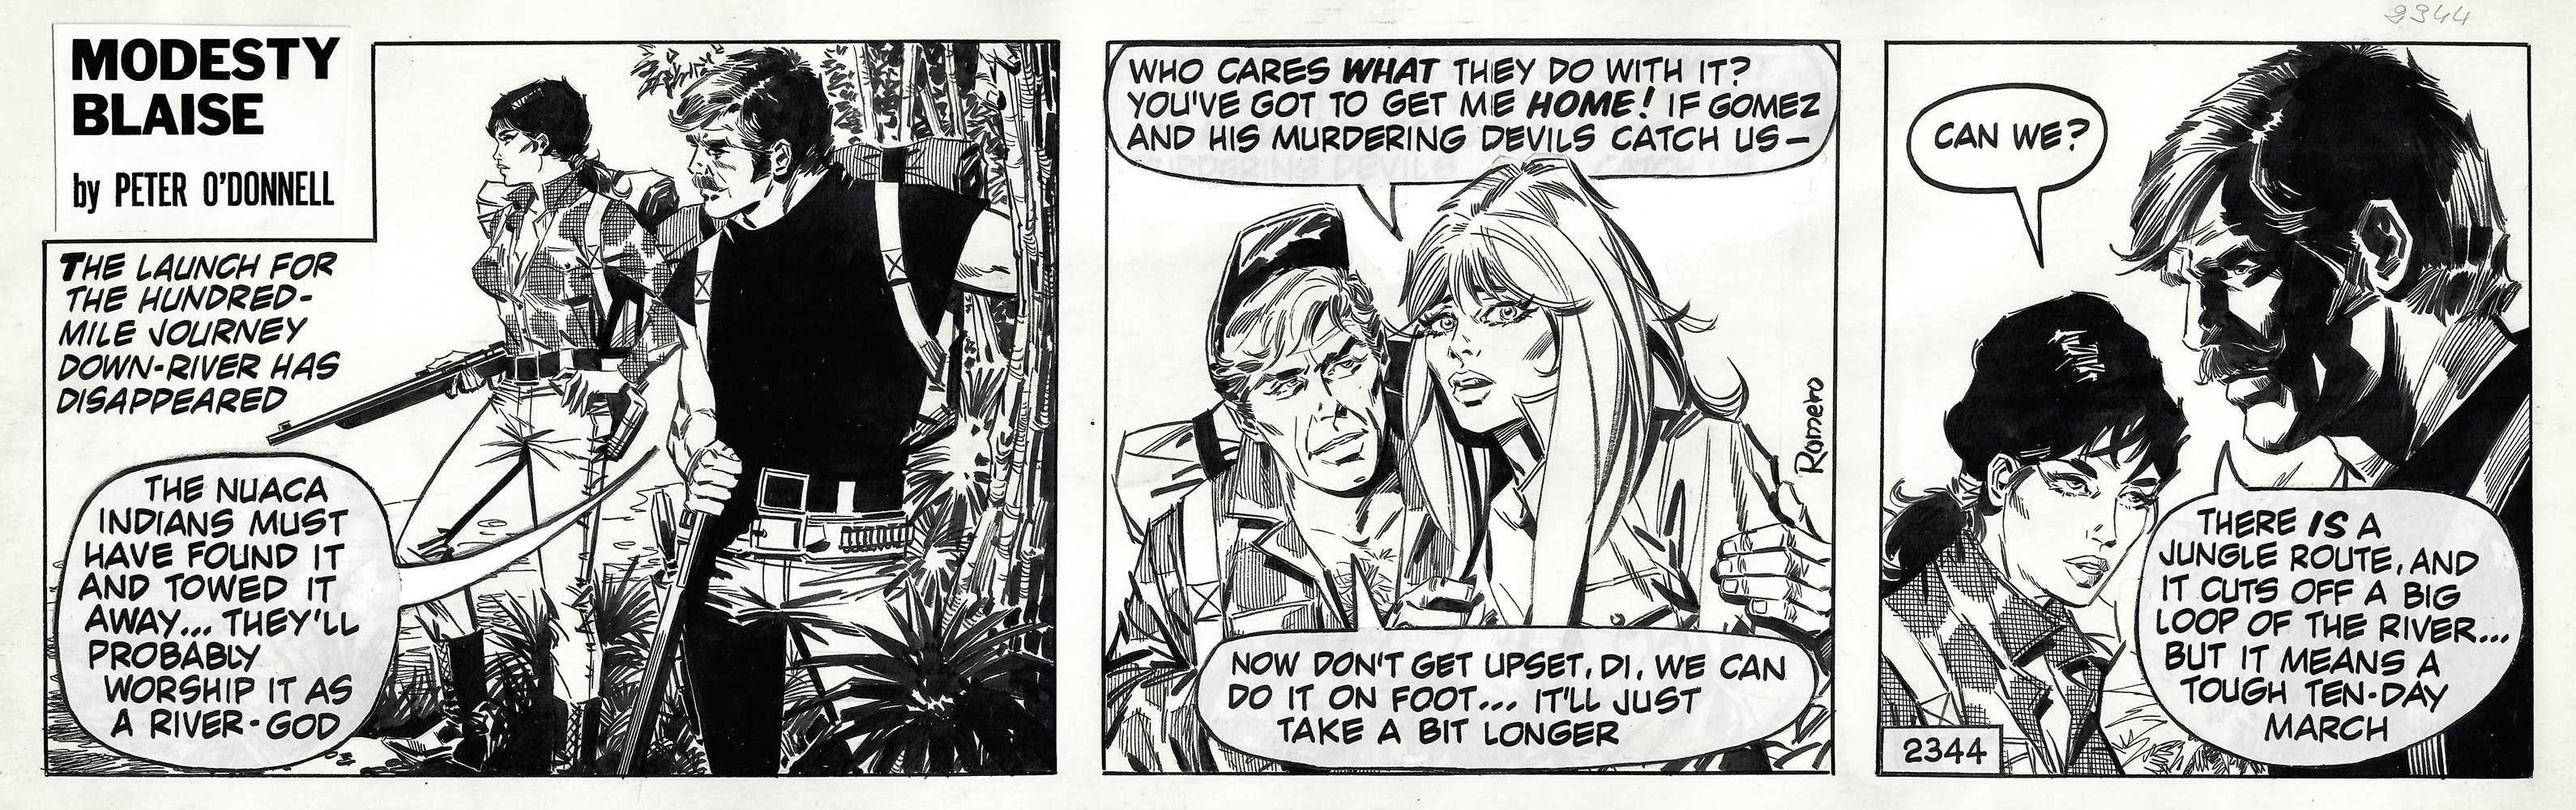 Modesty Blaise strip 2344 - The Vanishing Escape Route (Original) (Signed) art by Modesty Blaise (Romero) Art at The Illustration Art Gallery